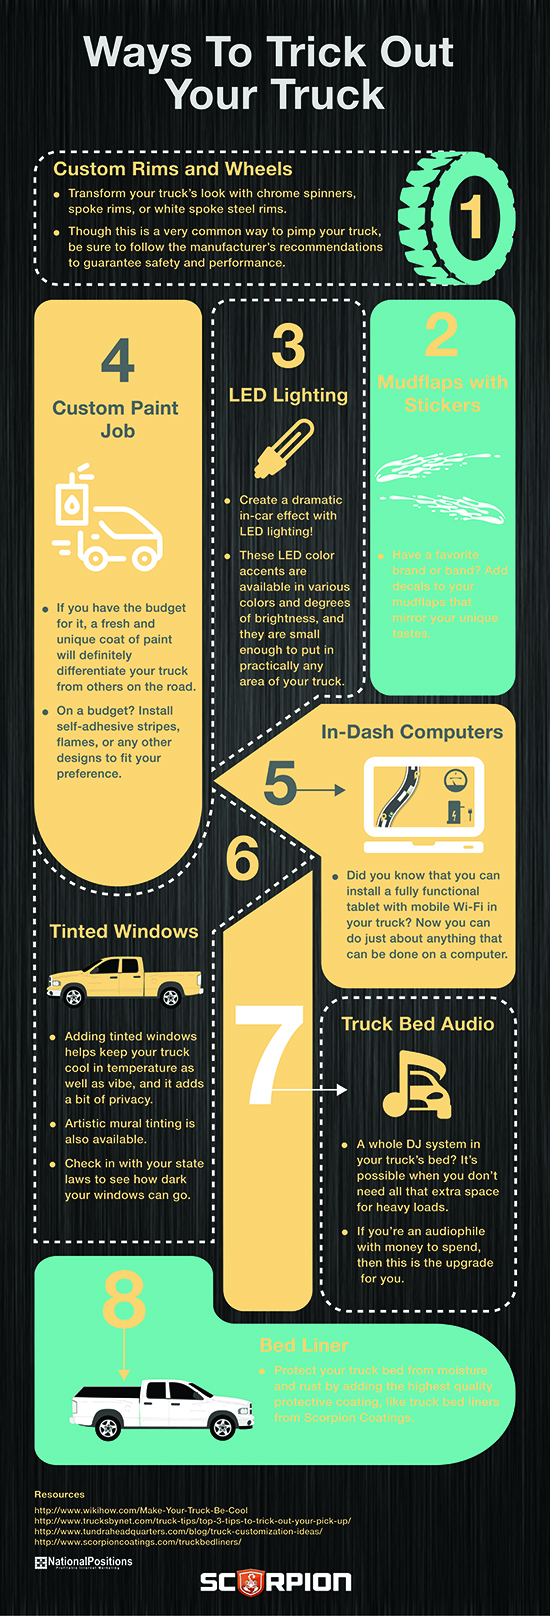 Ways to Trick Out Your Truck